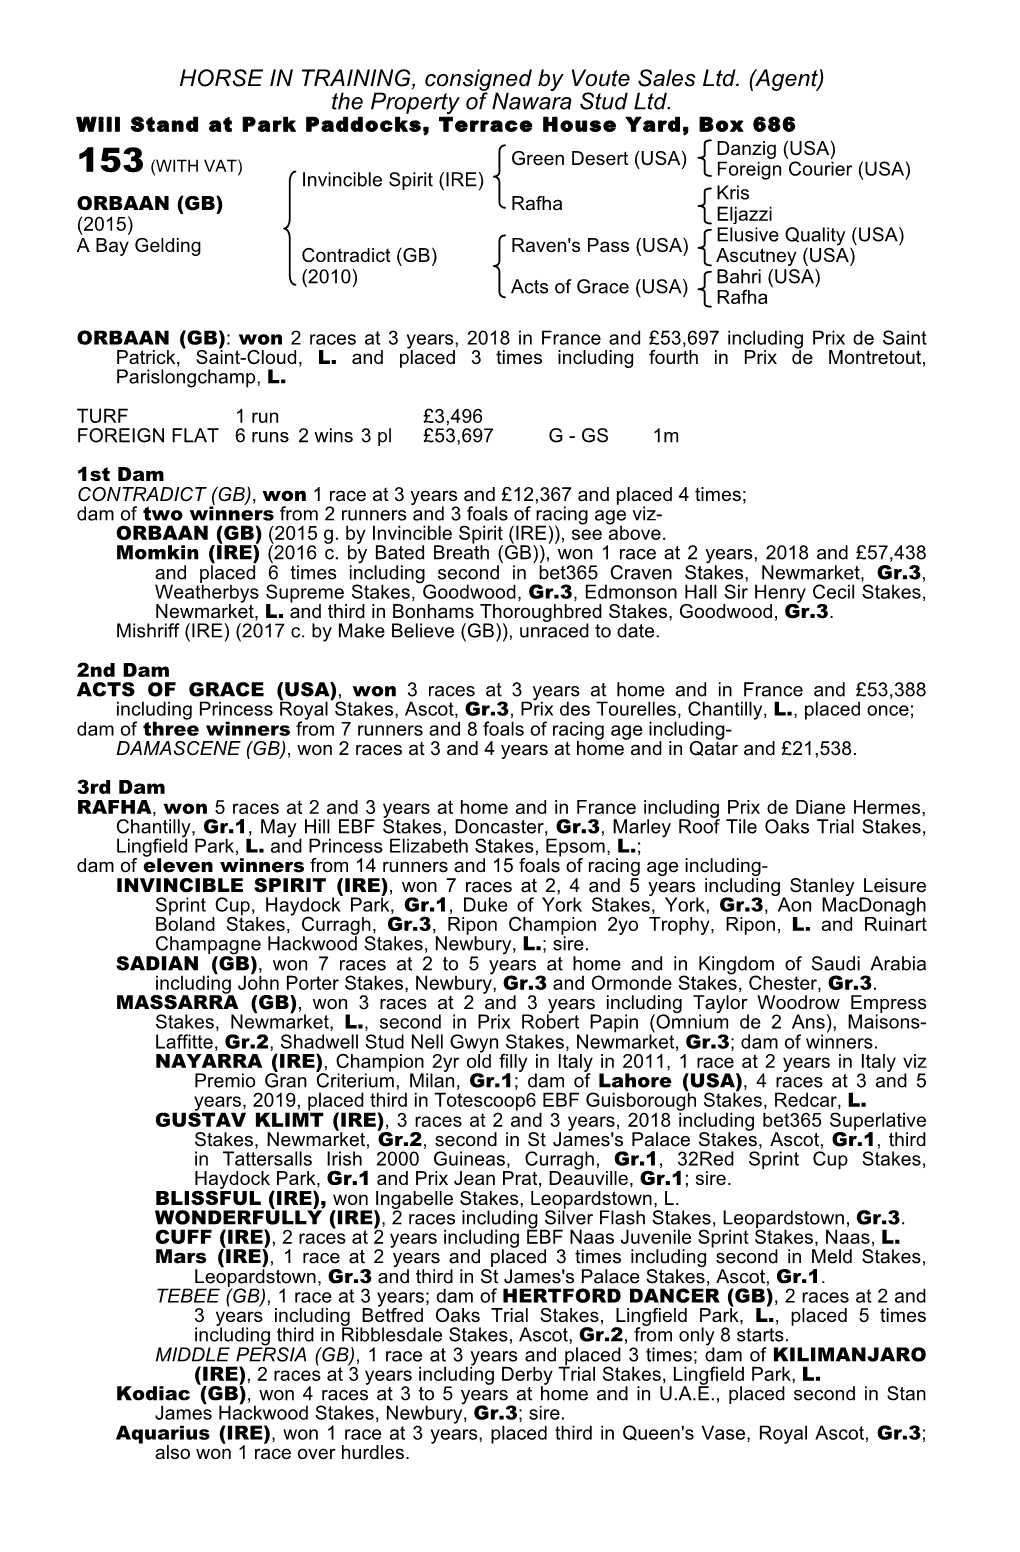 HORSE in TRAINING, Consigned by Voute Sales Ltd. (Agent) the Property of Nawara Stud Ltd